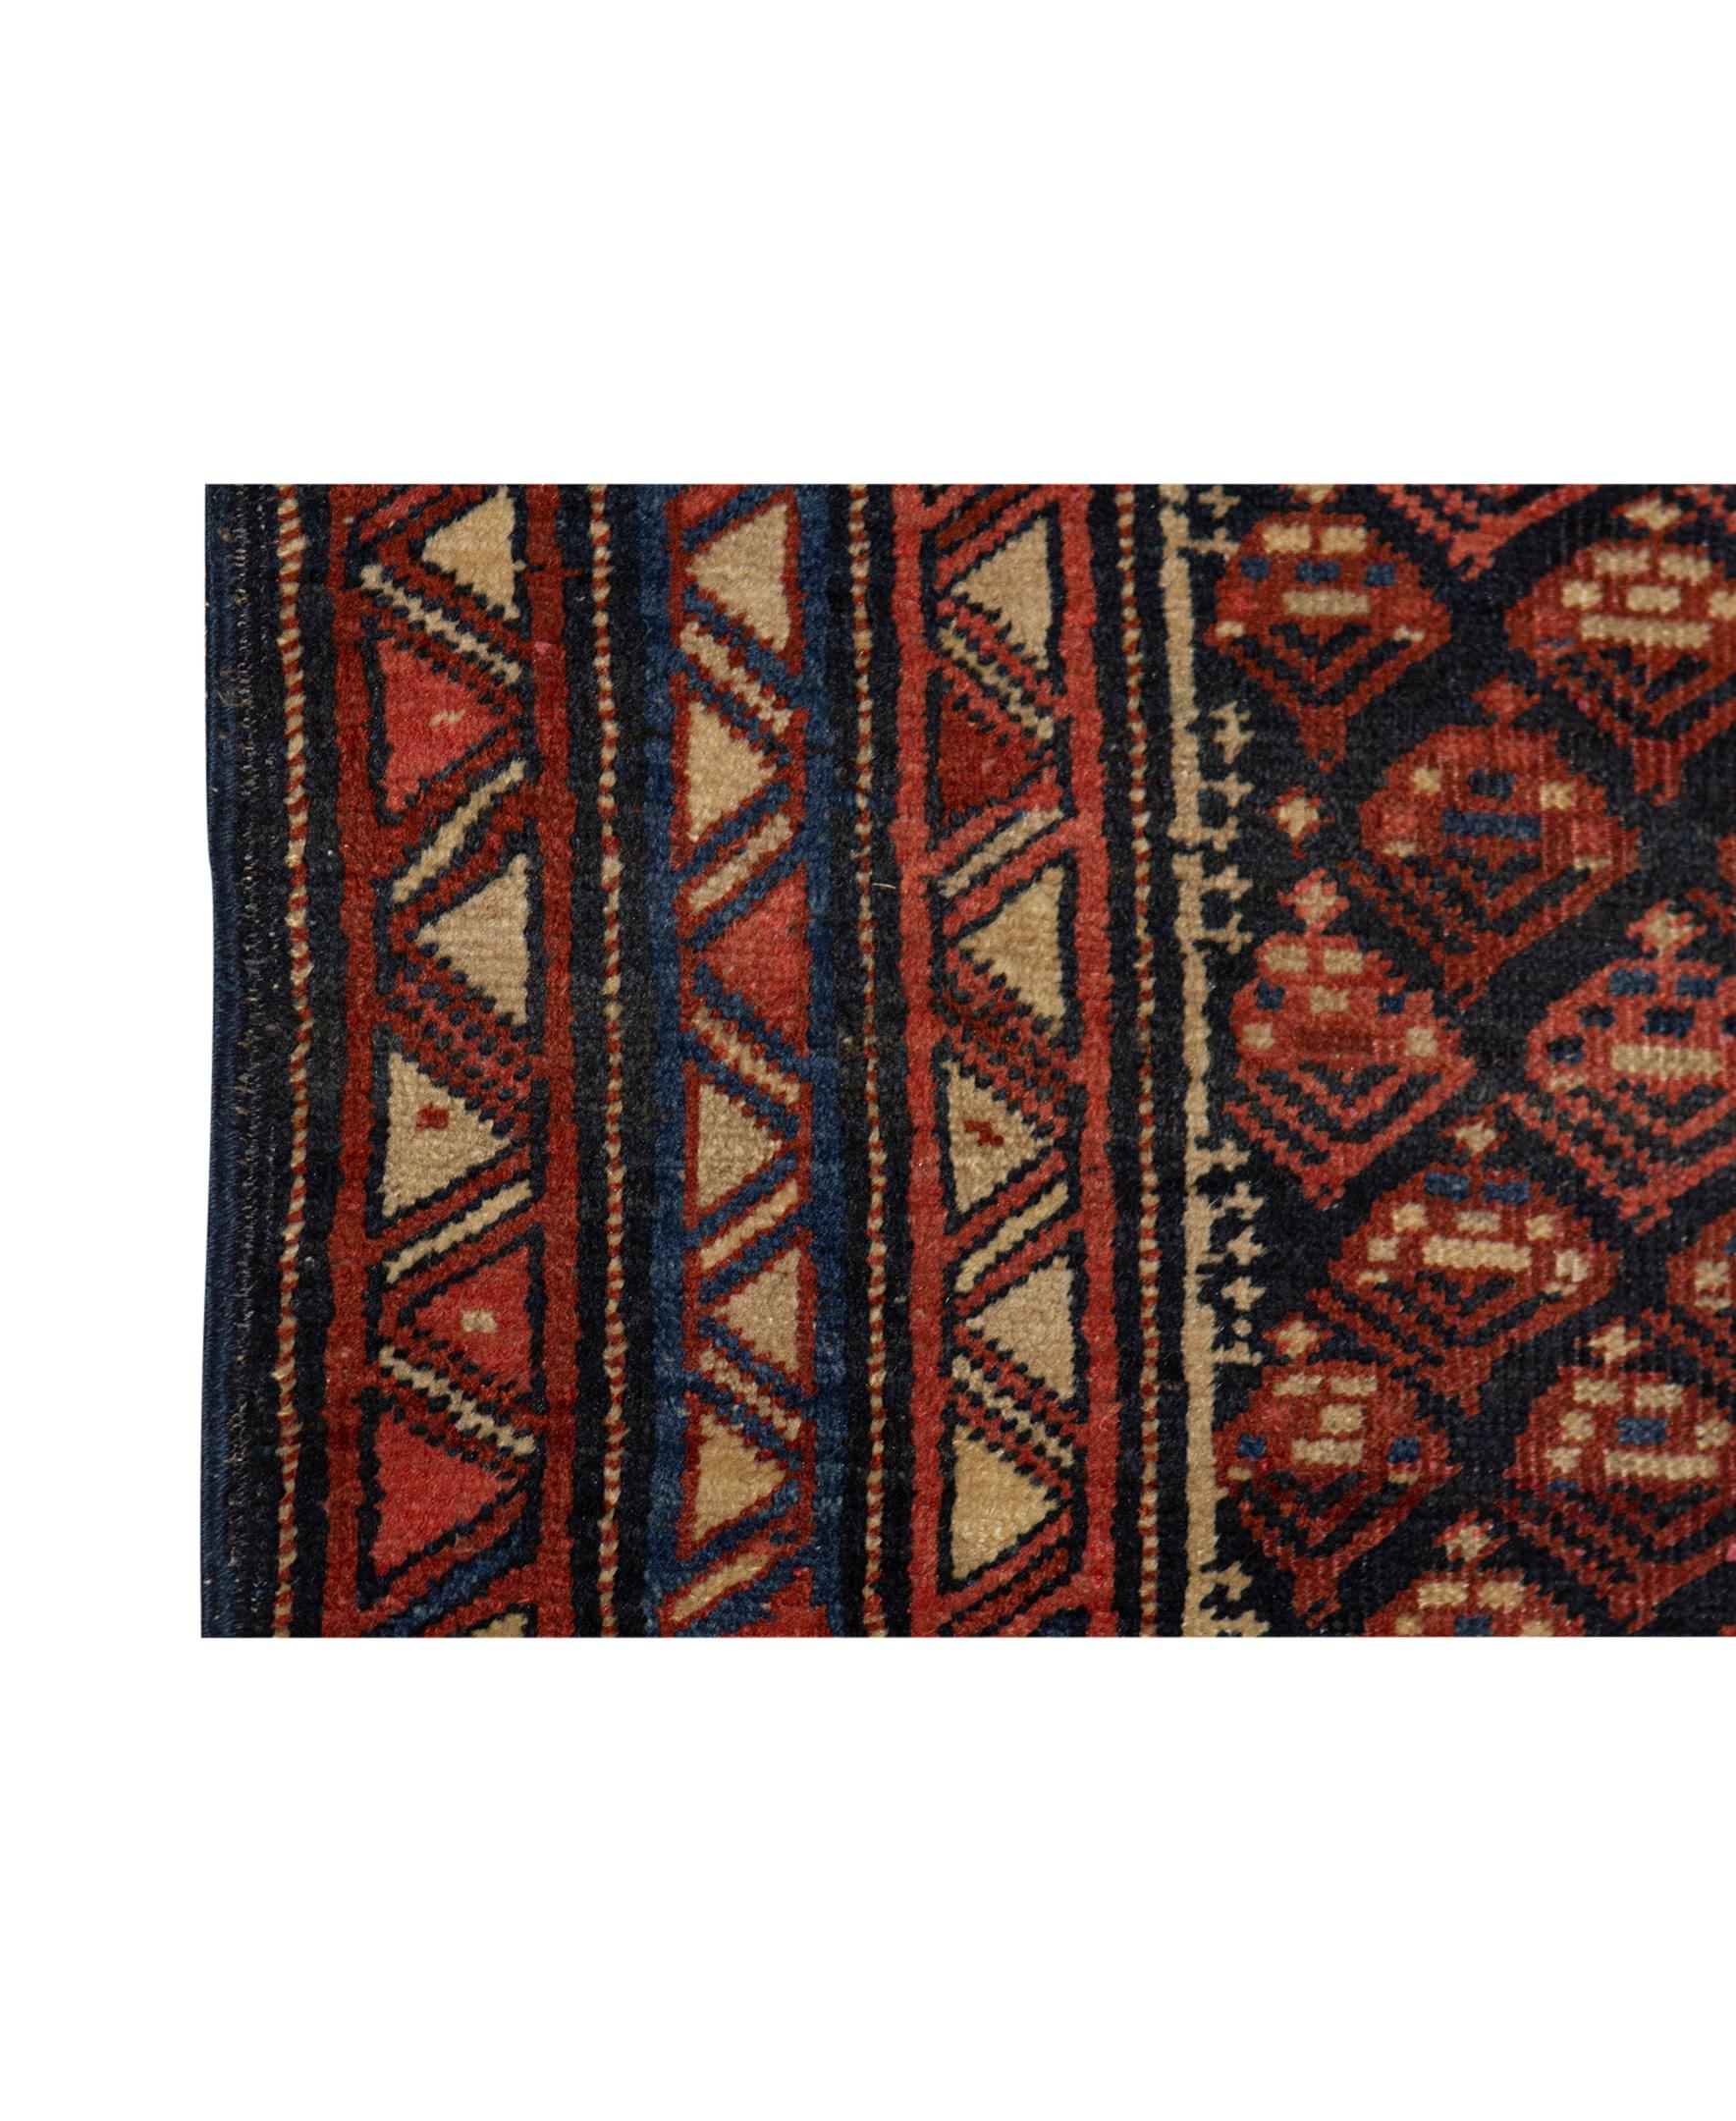   Antique Persian Fine Traditional Handwoven Luxury Wool Multi Runner. Szize: 3'-4